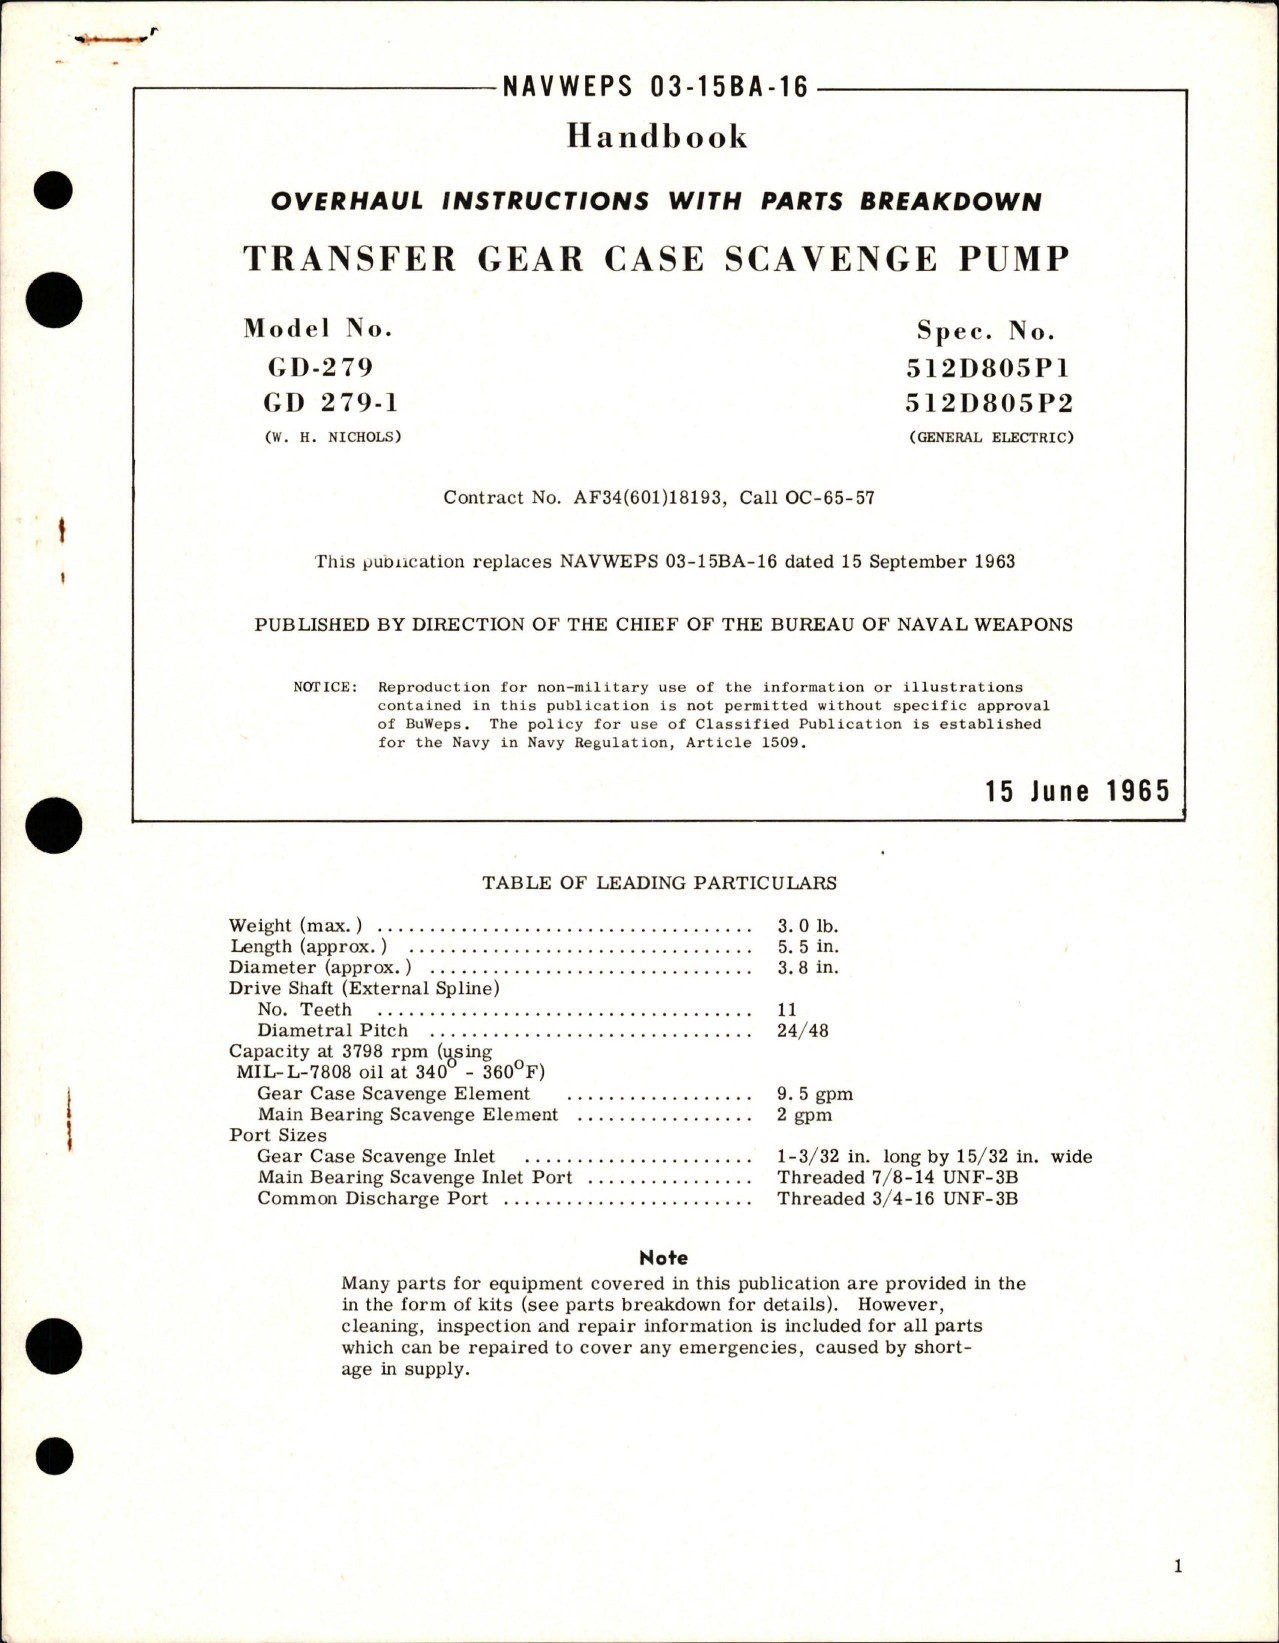 Sample page 1 from AirCorps Library document: Overhaul Instructions with Parts for Transfer Gear Case Scavenge Pump - Models GD-279 and GD-279-1